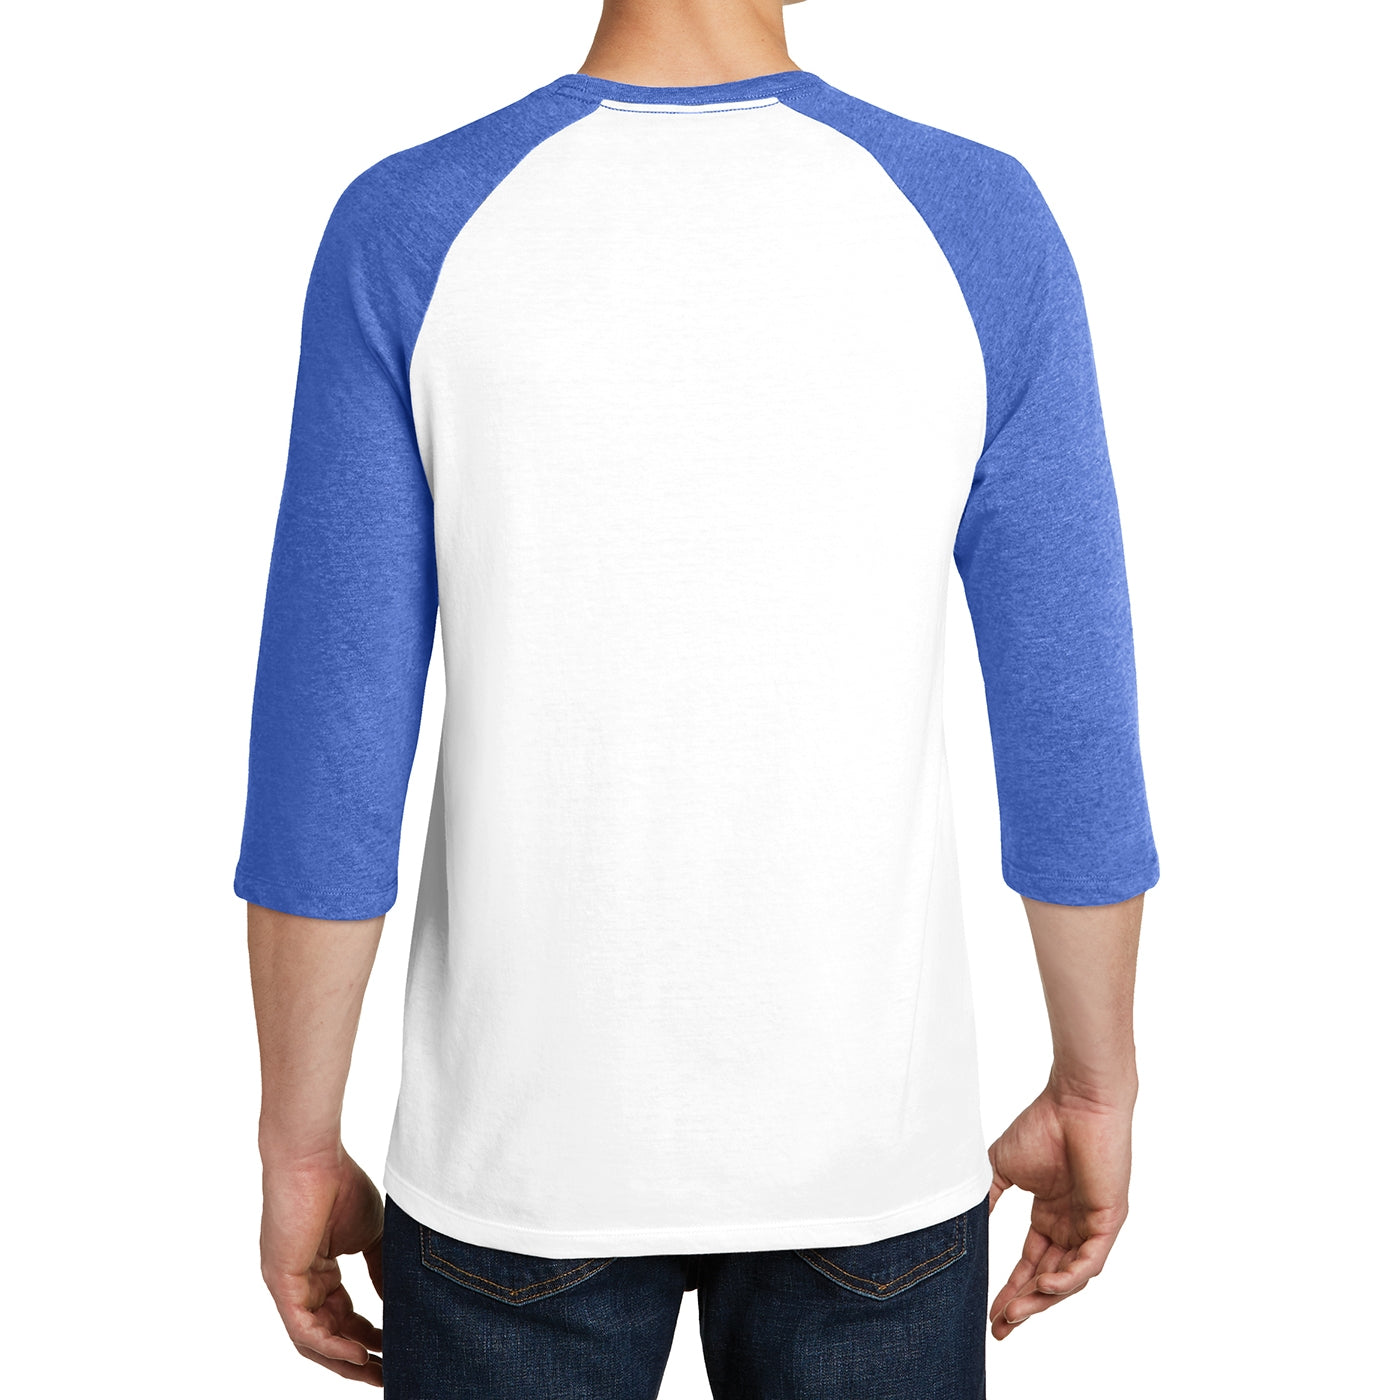 Men's Young  Very Important Tee 3/4-Sleeve Raglan - Royal Frost/ White